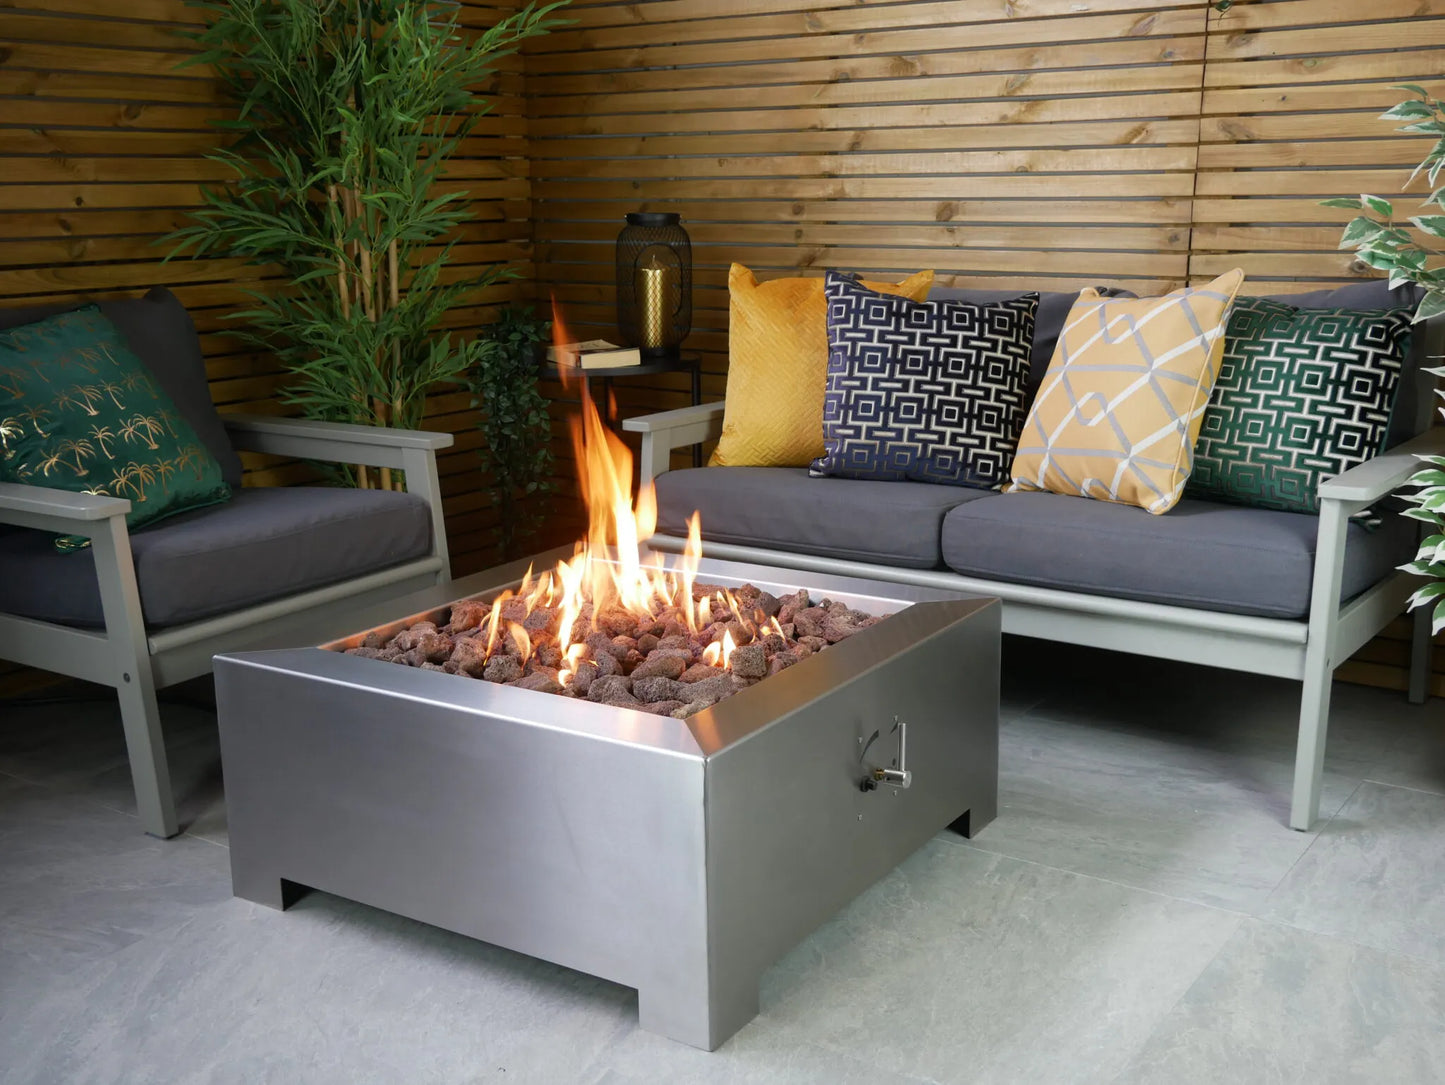 Brightstar Fires - Castillo Gas Zinc Fire Pit Table - Square - Luxury Fire Pits - PadioLiving - Brightstar Fires - Castillo Gas Zinc Fire Pit Table - Square - Luxury Fire Pits - Fire Pit Table - PadioLiving